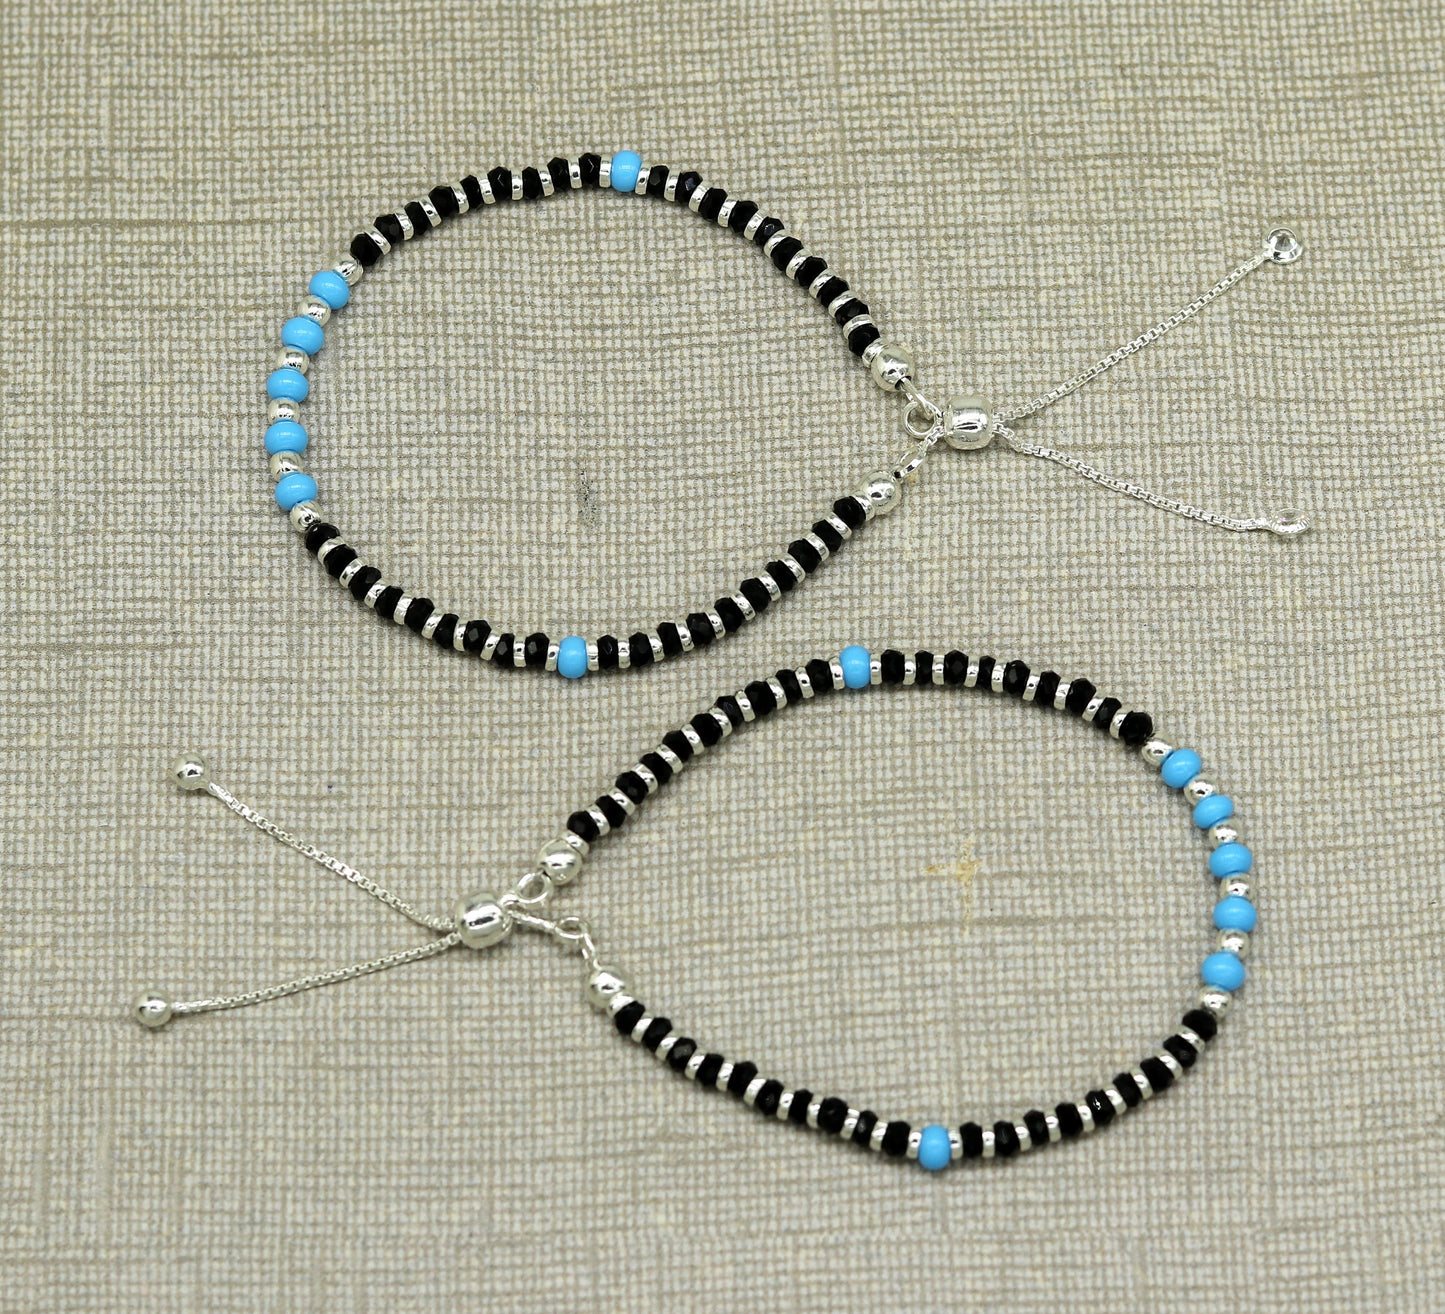 7 inches long handmade 925 sterling silver fabulous silver beads, blue stone charm adjustable customized bracelet for girl's gifting sbr172 - TRIBAL ORNAMENTS